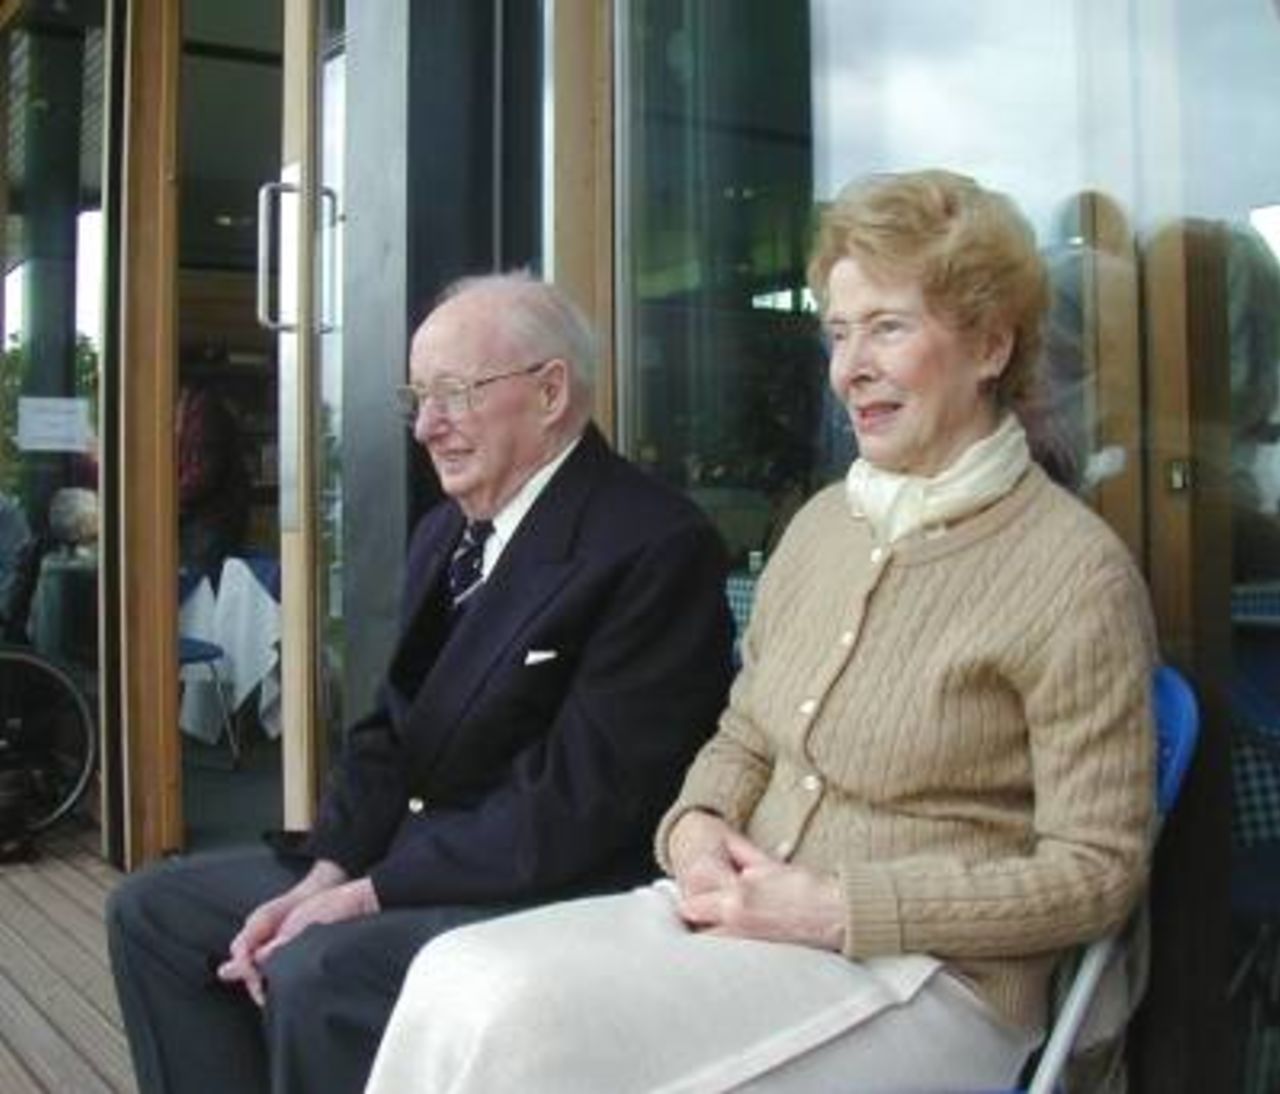 Former cricket chairman Charles Knott with wife, surveys the new set up